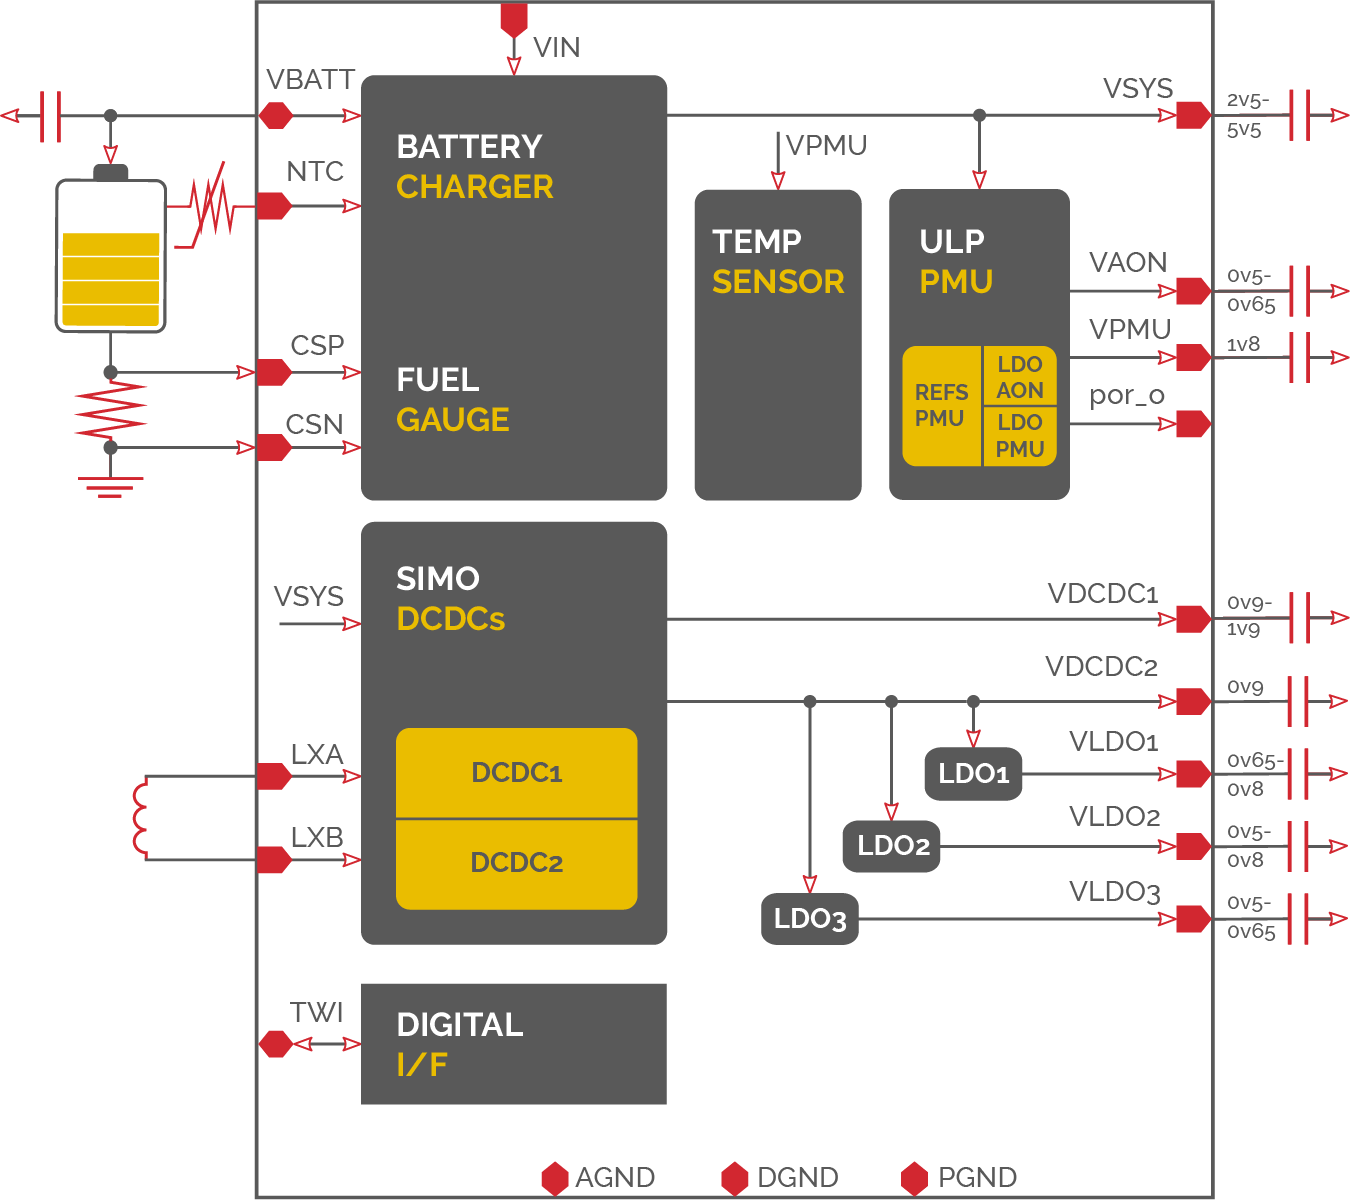 Block Diagram of PMIP for hearables